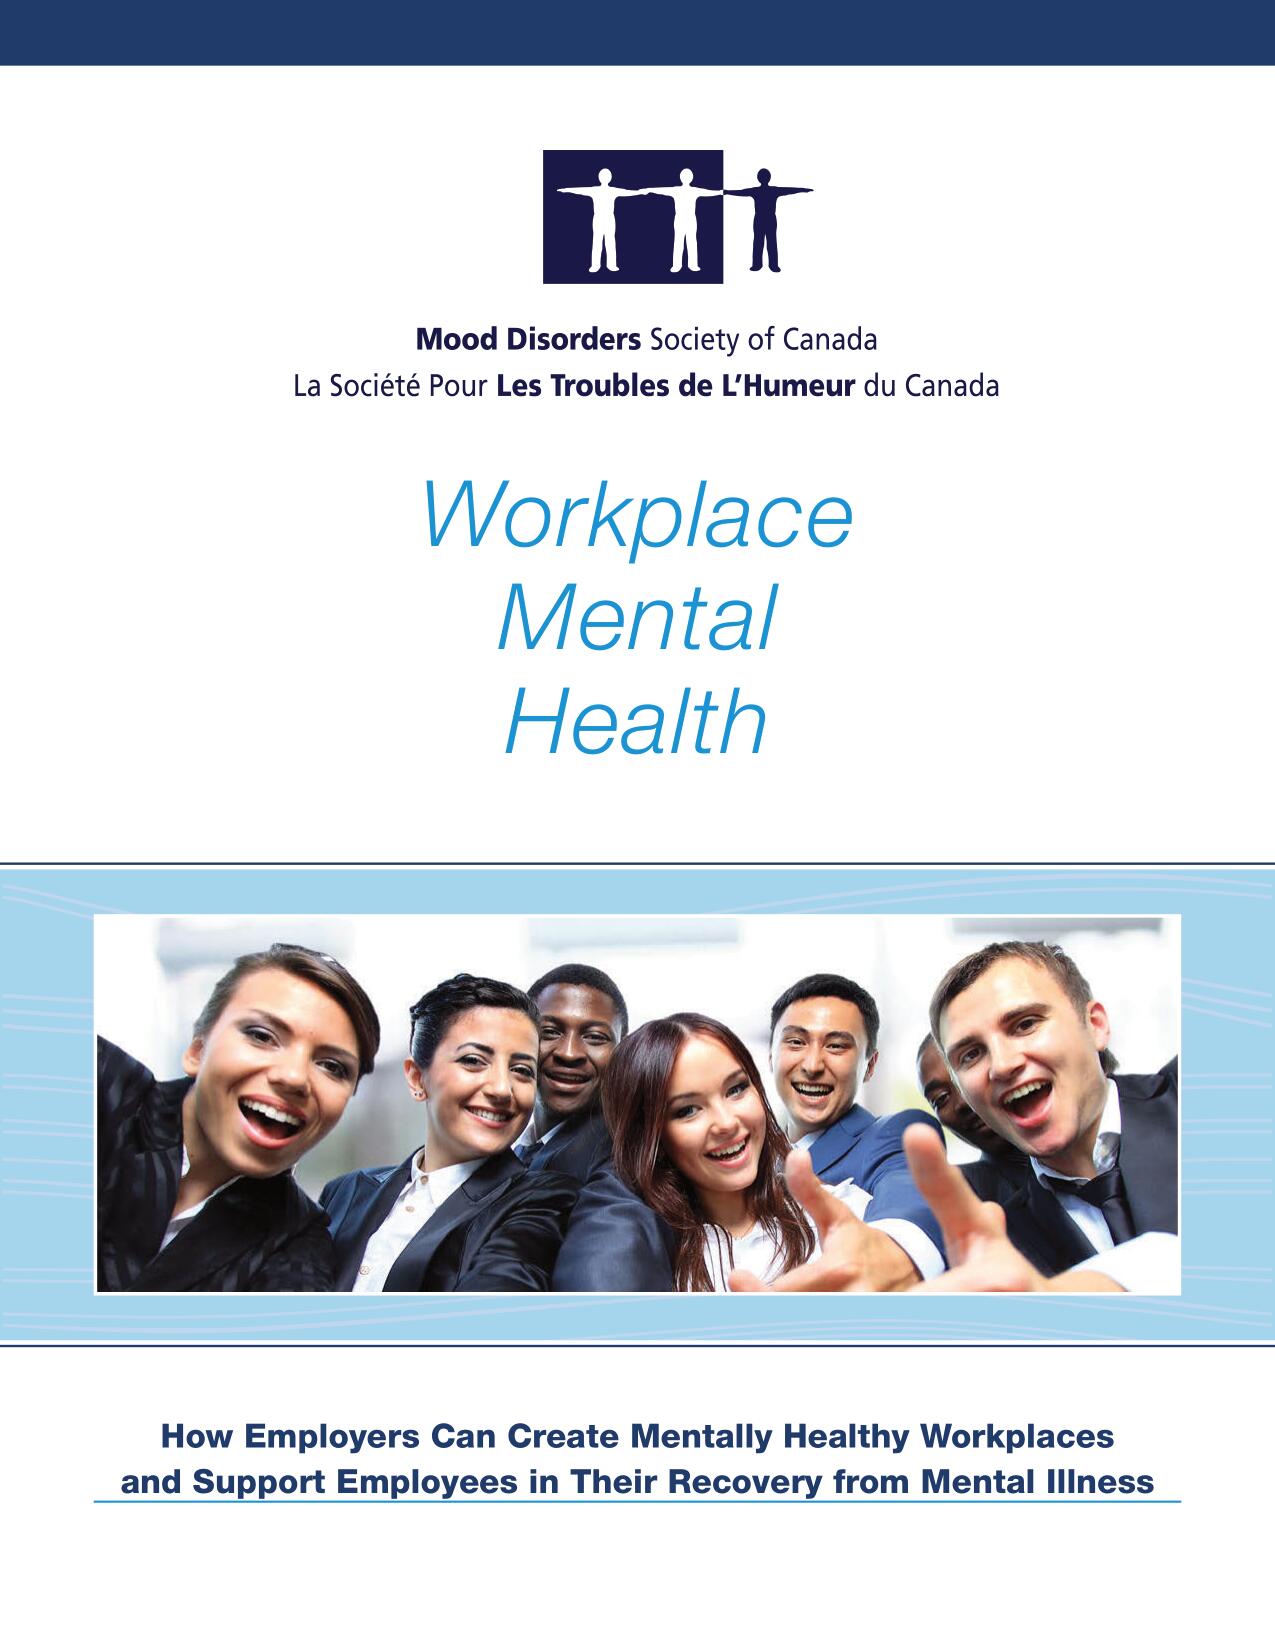 mental health in the workplace booklet